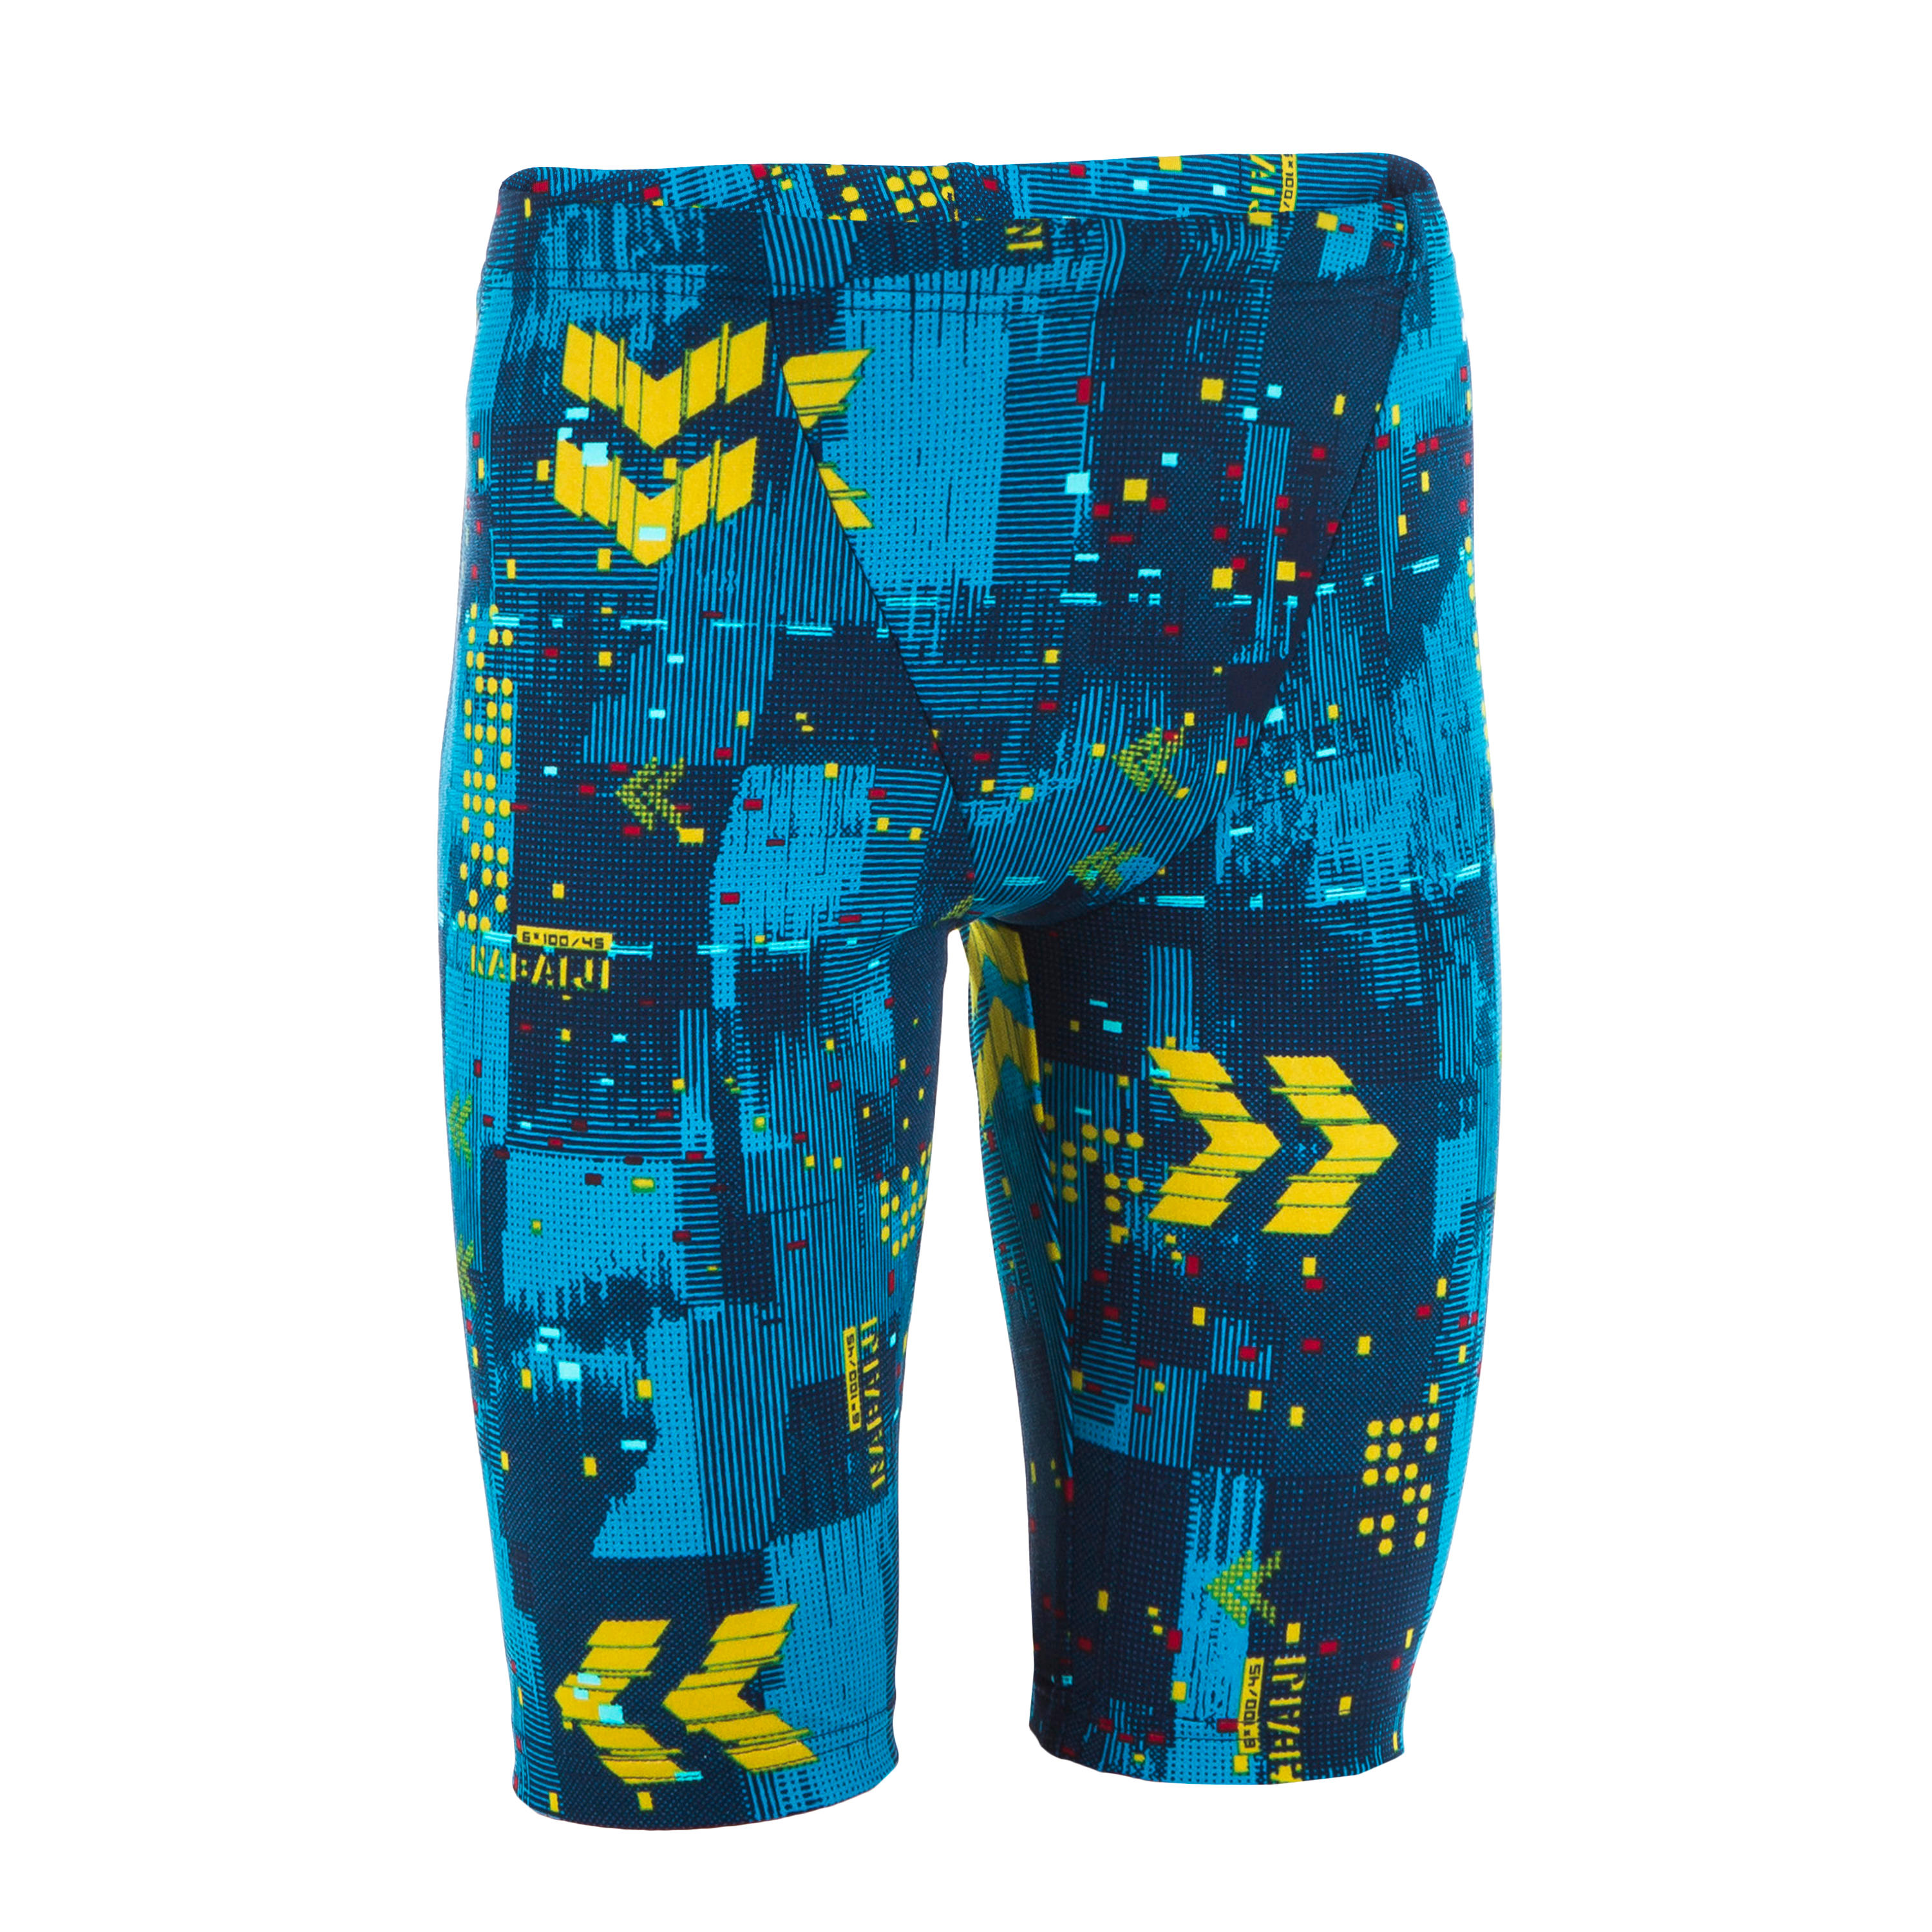 NABAIJI BOY'S FITI SWIMMING JAMMERS - ALL MAP TURQUOISE GREEN